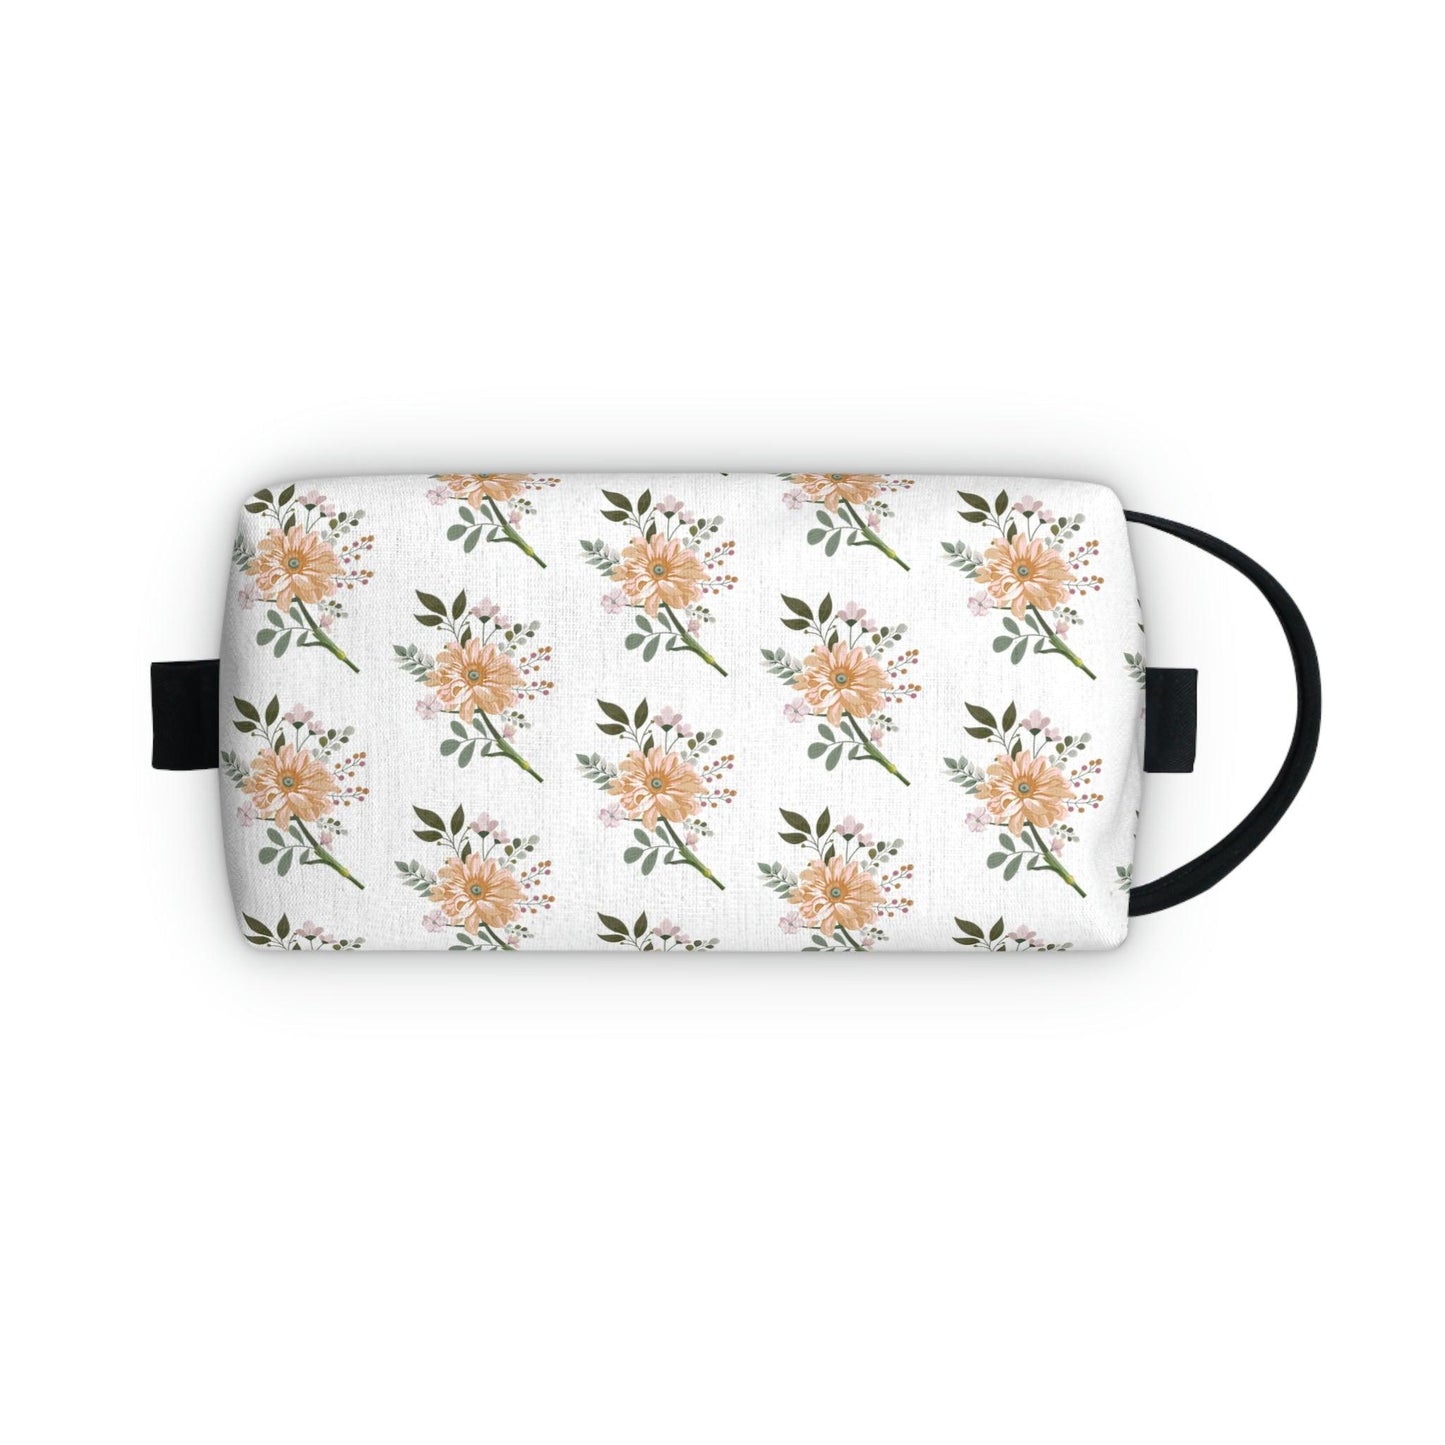 Floral Makeup Bag | Cosmetic Bag Travel Bag | flower makeup bag floral Toiletry Bag | makeup bags | makeup pouch makeup bag for travelling - Giftsmojo